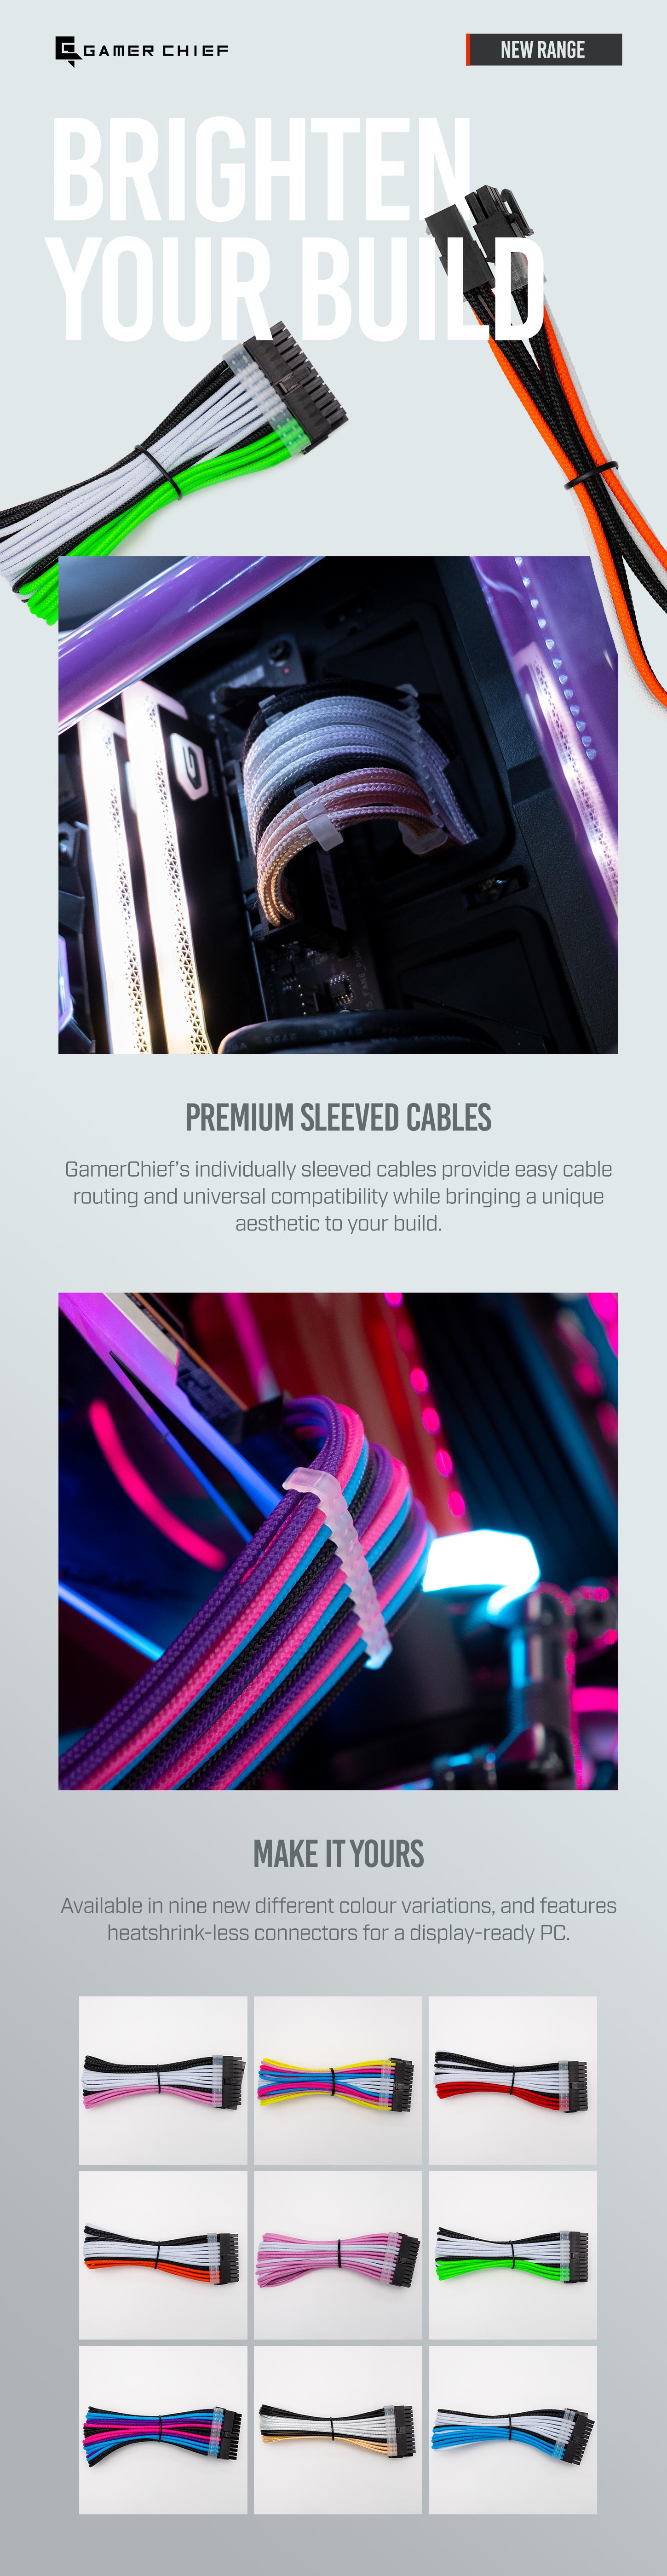 A large marketing image providing additional information about the product GamerChief Elite Series 6-Pin PCIe 30cm Sleeved Extension Cable (Orange/White/Black) - Additional alt info not provided